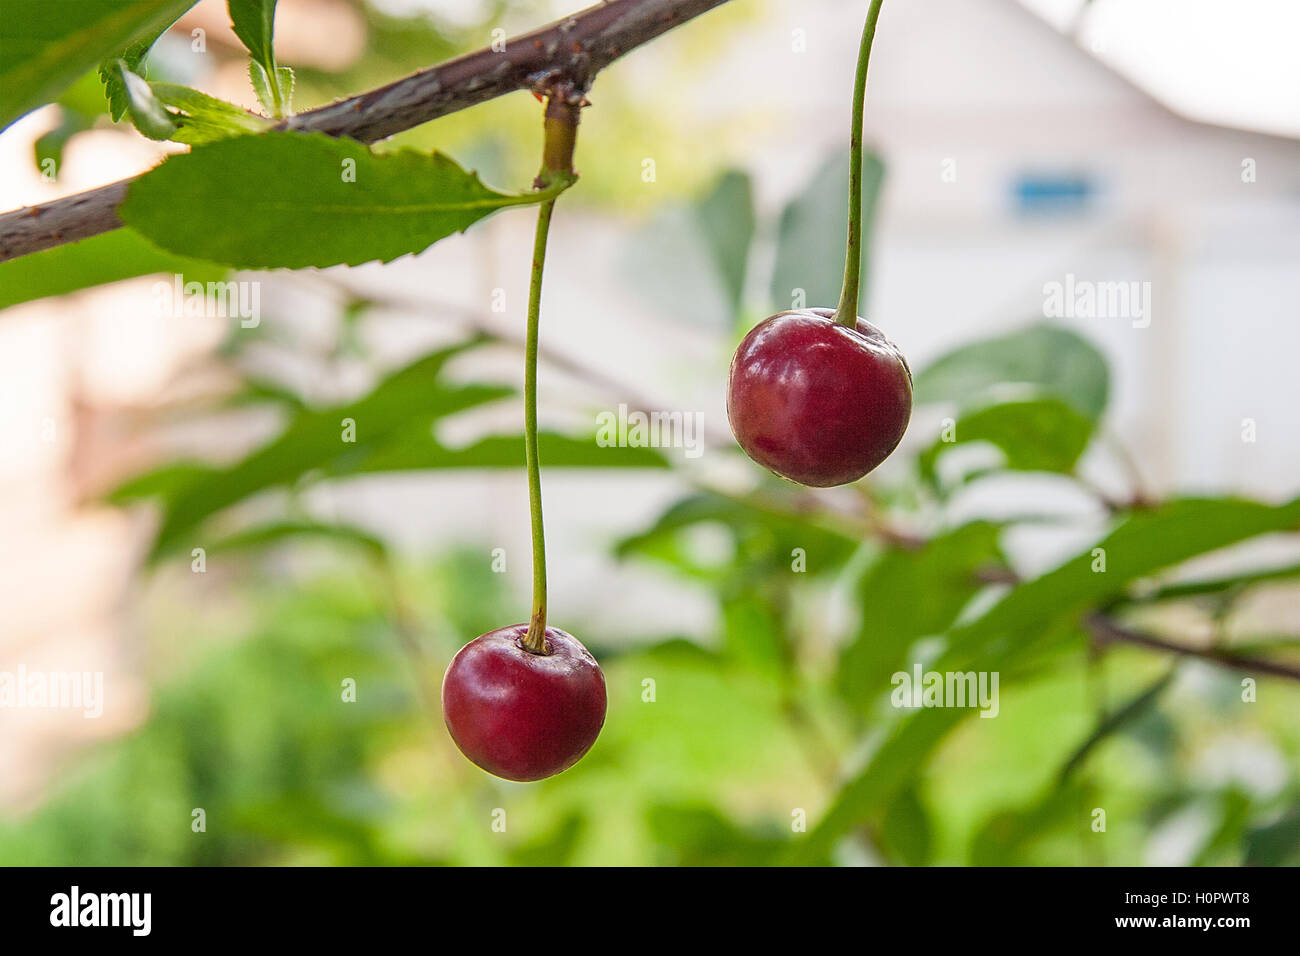 Red cherries on a branch just before harvest in the garden at summer time. Red ripe cherries on a tree branch Stock Photo